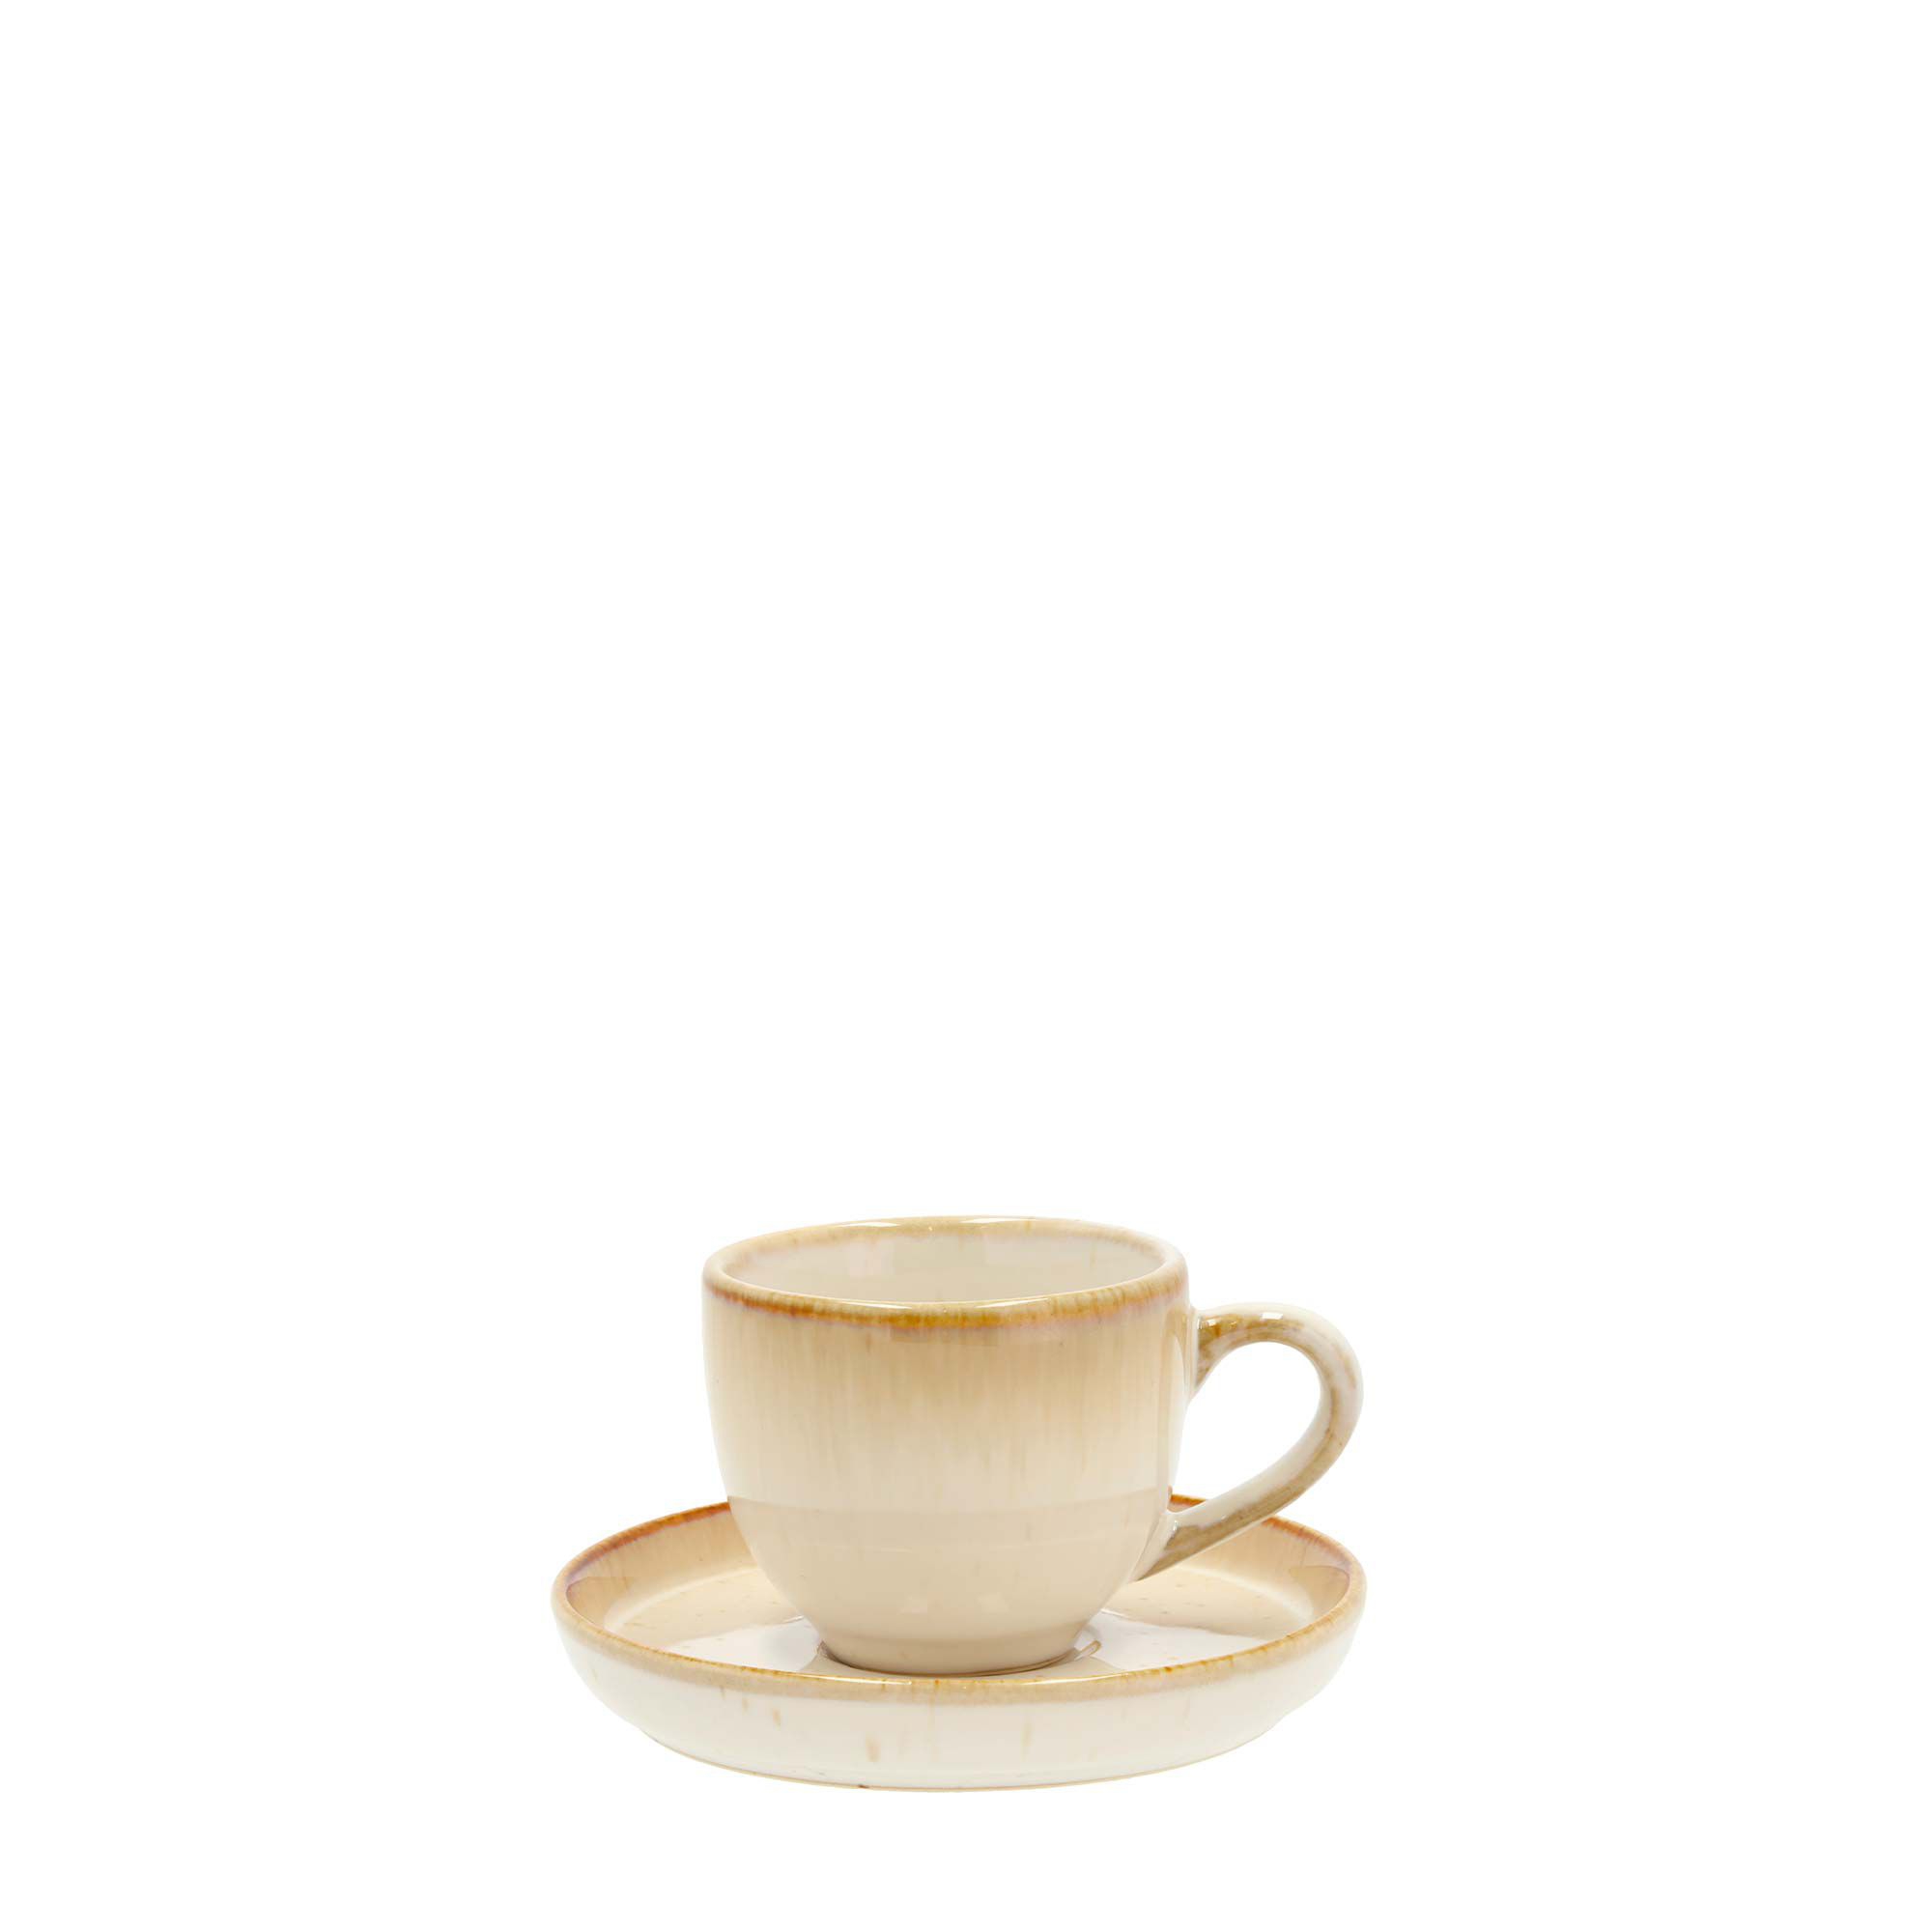 Bitz - Espresso cup with handle and saucer - 7cl